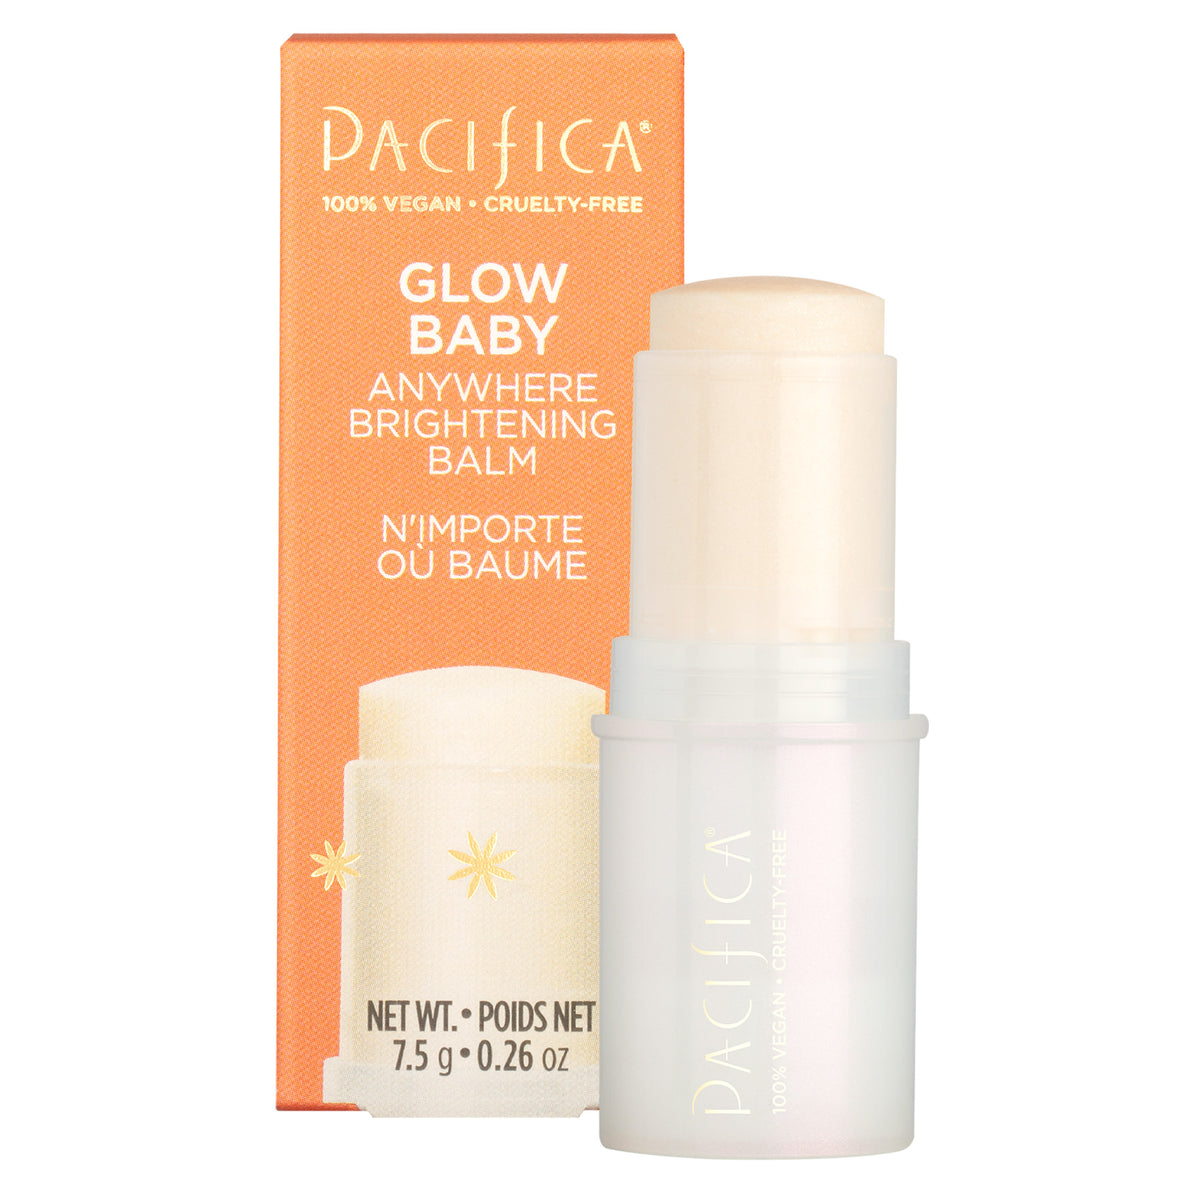 Glow Baby Anywhere Brightening Balm - Makeup - Pacifica Beauty